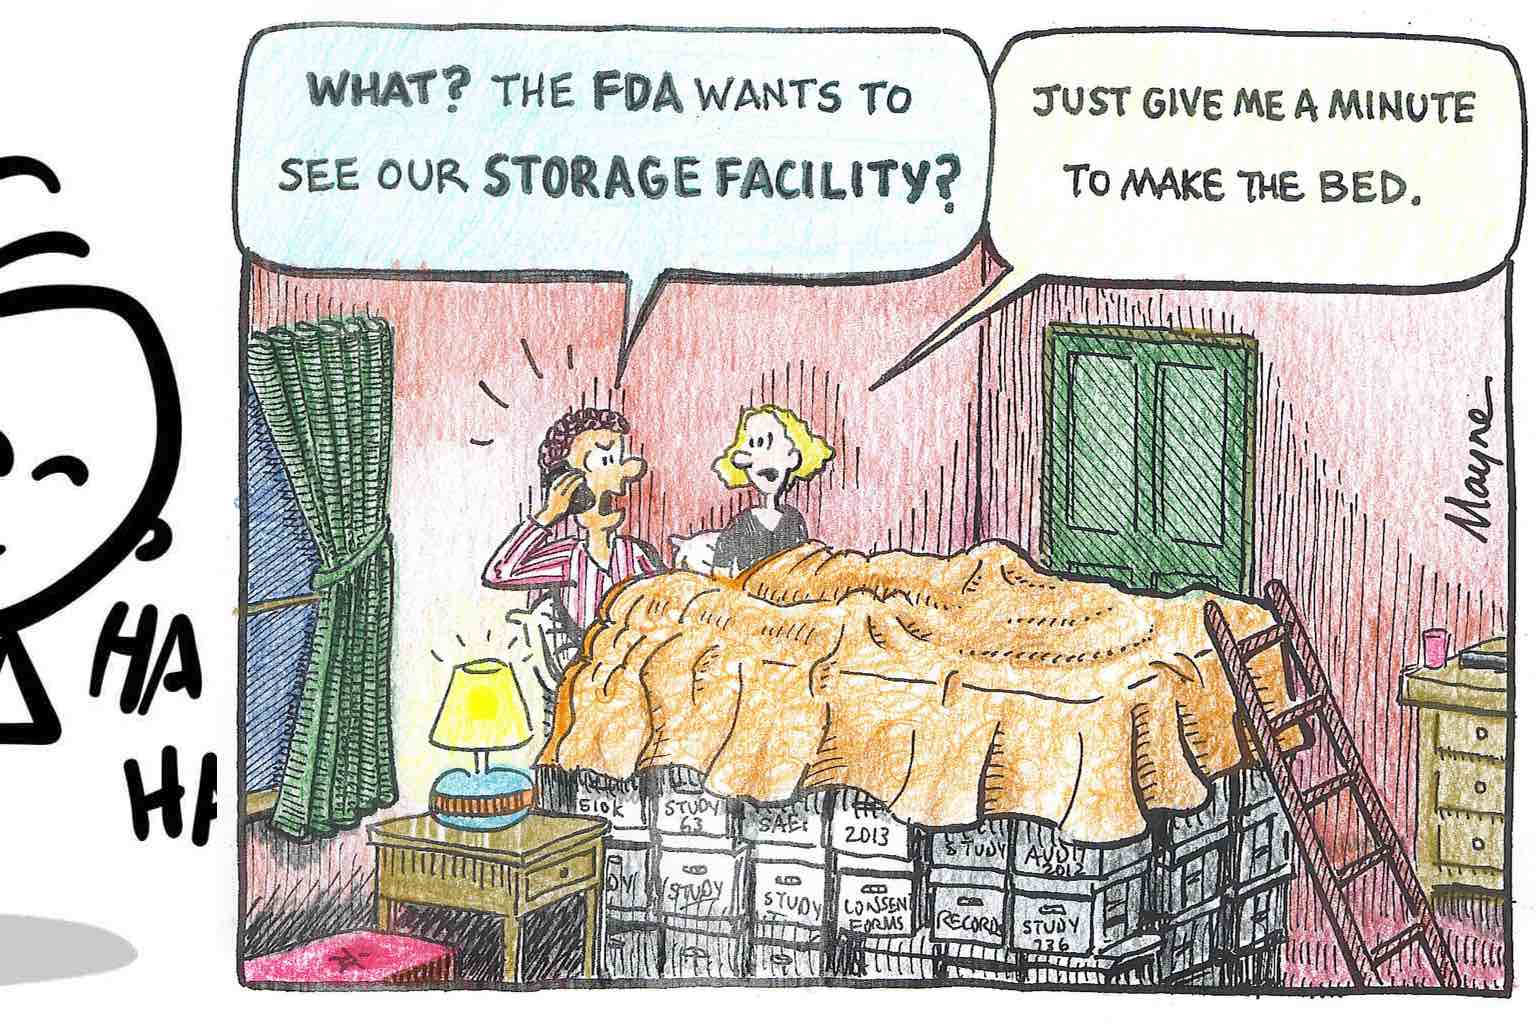 A funny cartoon of a researcher using their home stored research data as a bed.